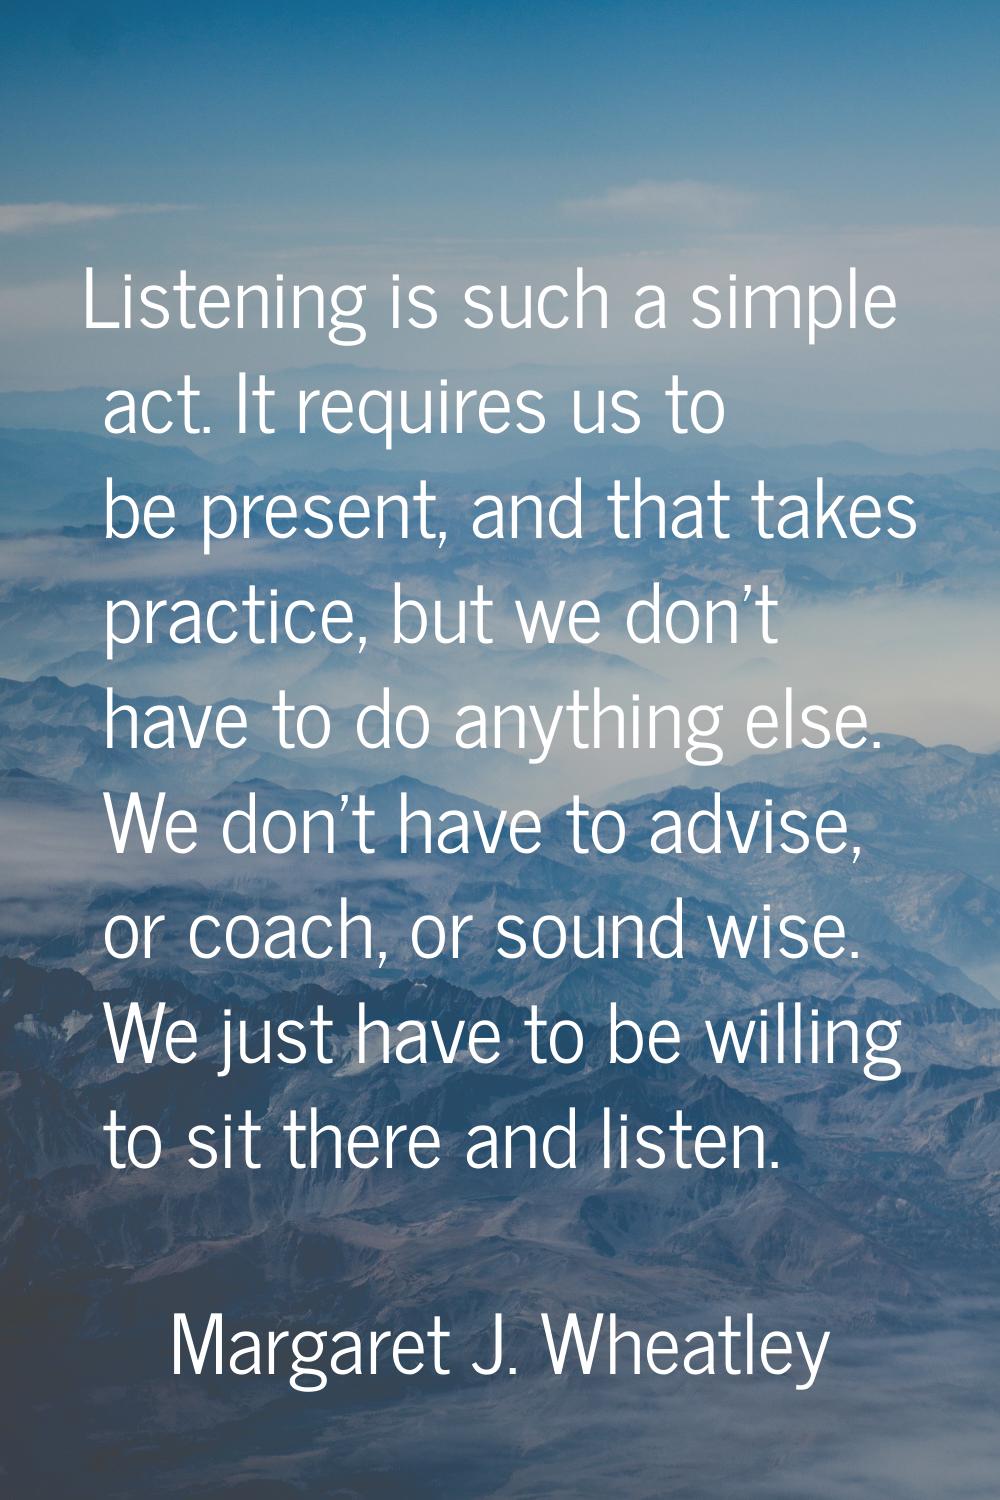 Listening is such a simple act. It requires us to be present, and that takes practice, but we don't